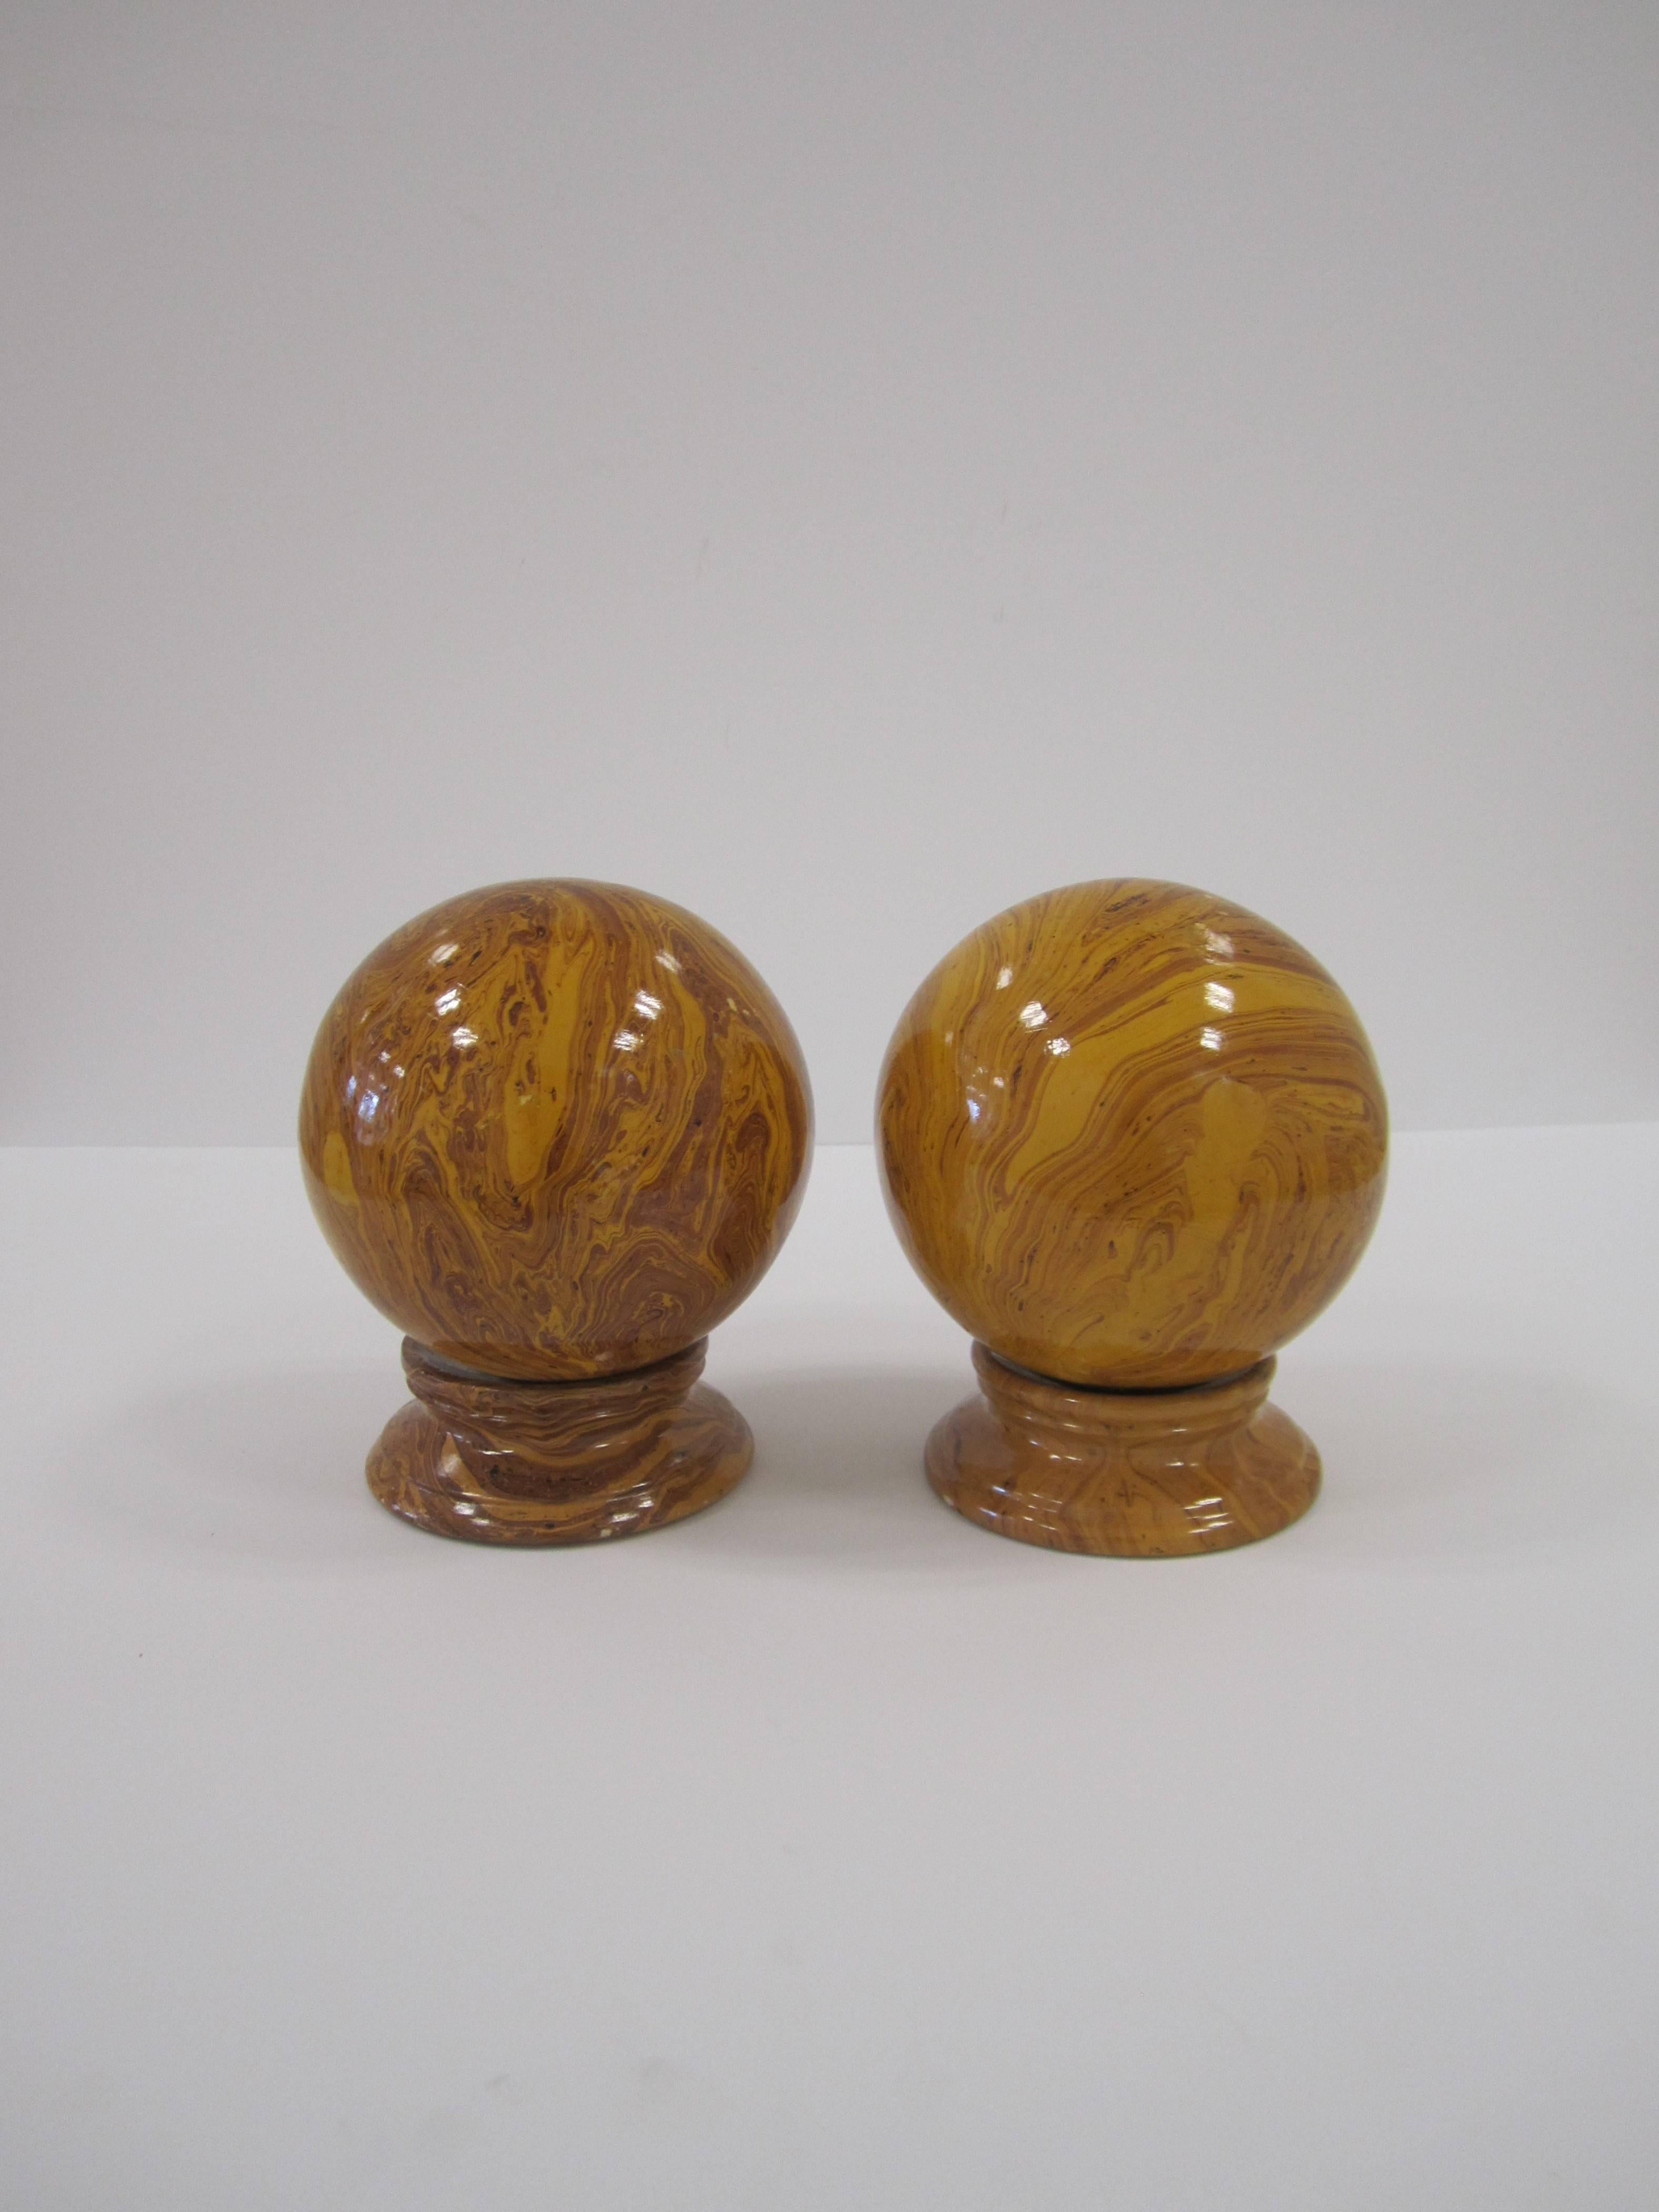 20th Century Italian Yellow Pottery Marbleized Ball Spheres Garnitures on Pedestals, Pair For Sale